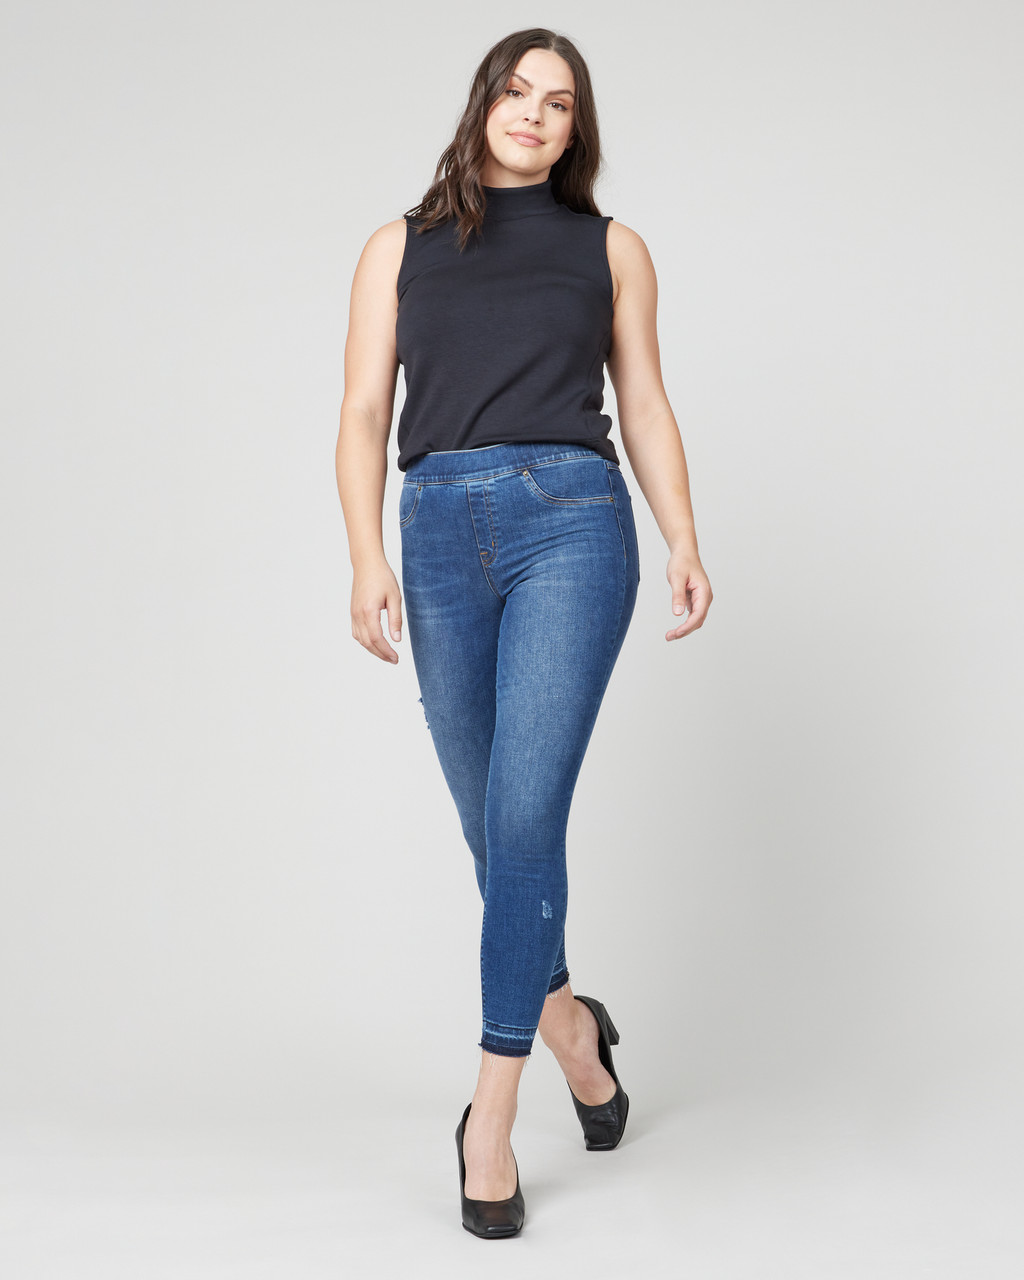 Spanx Distressed Ankle Skinny Jeans, Medium Wash - $63 - From Marissa